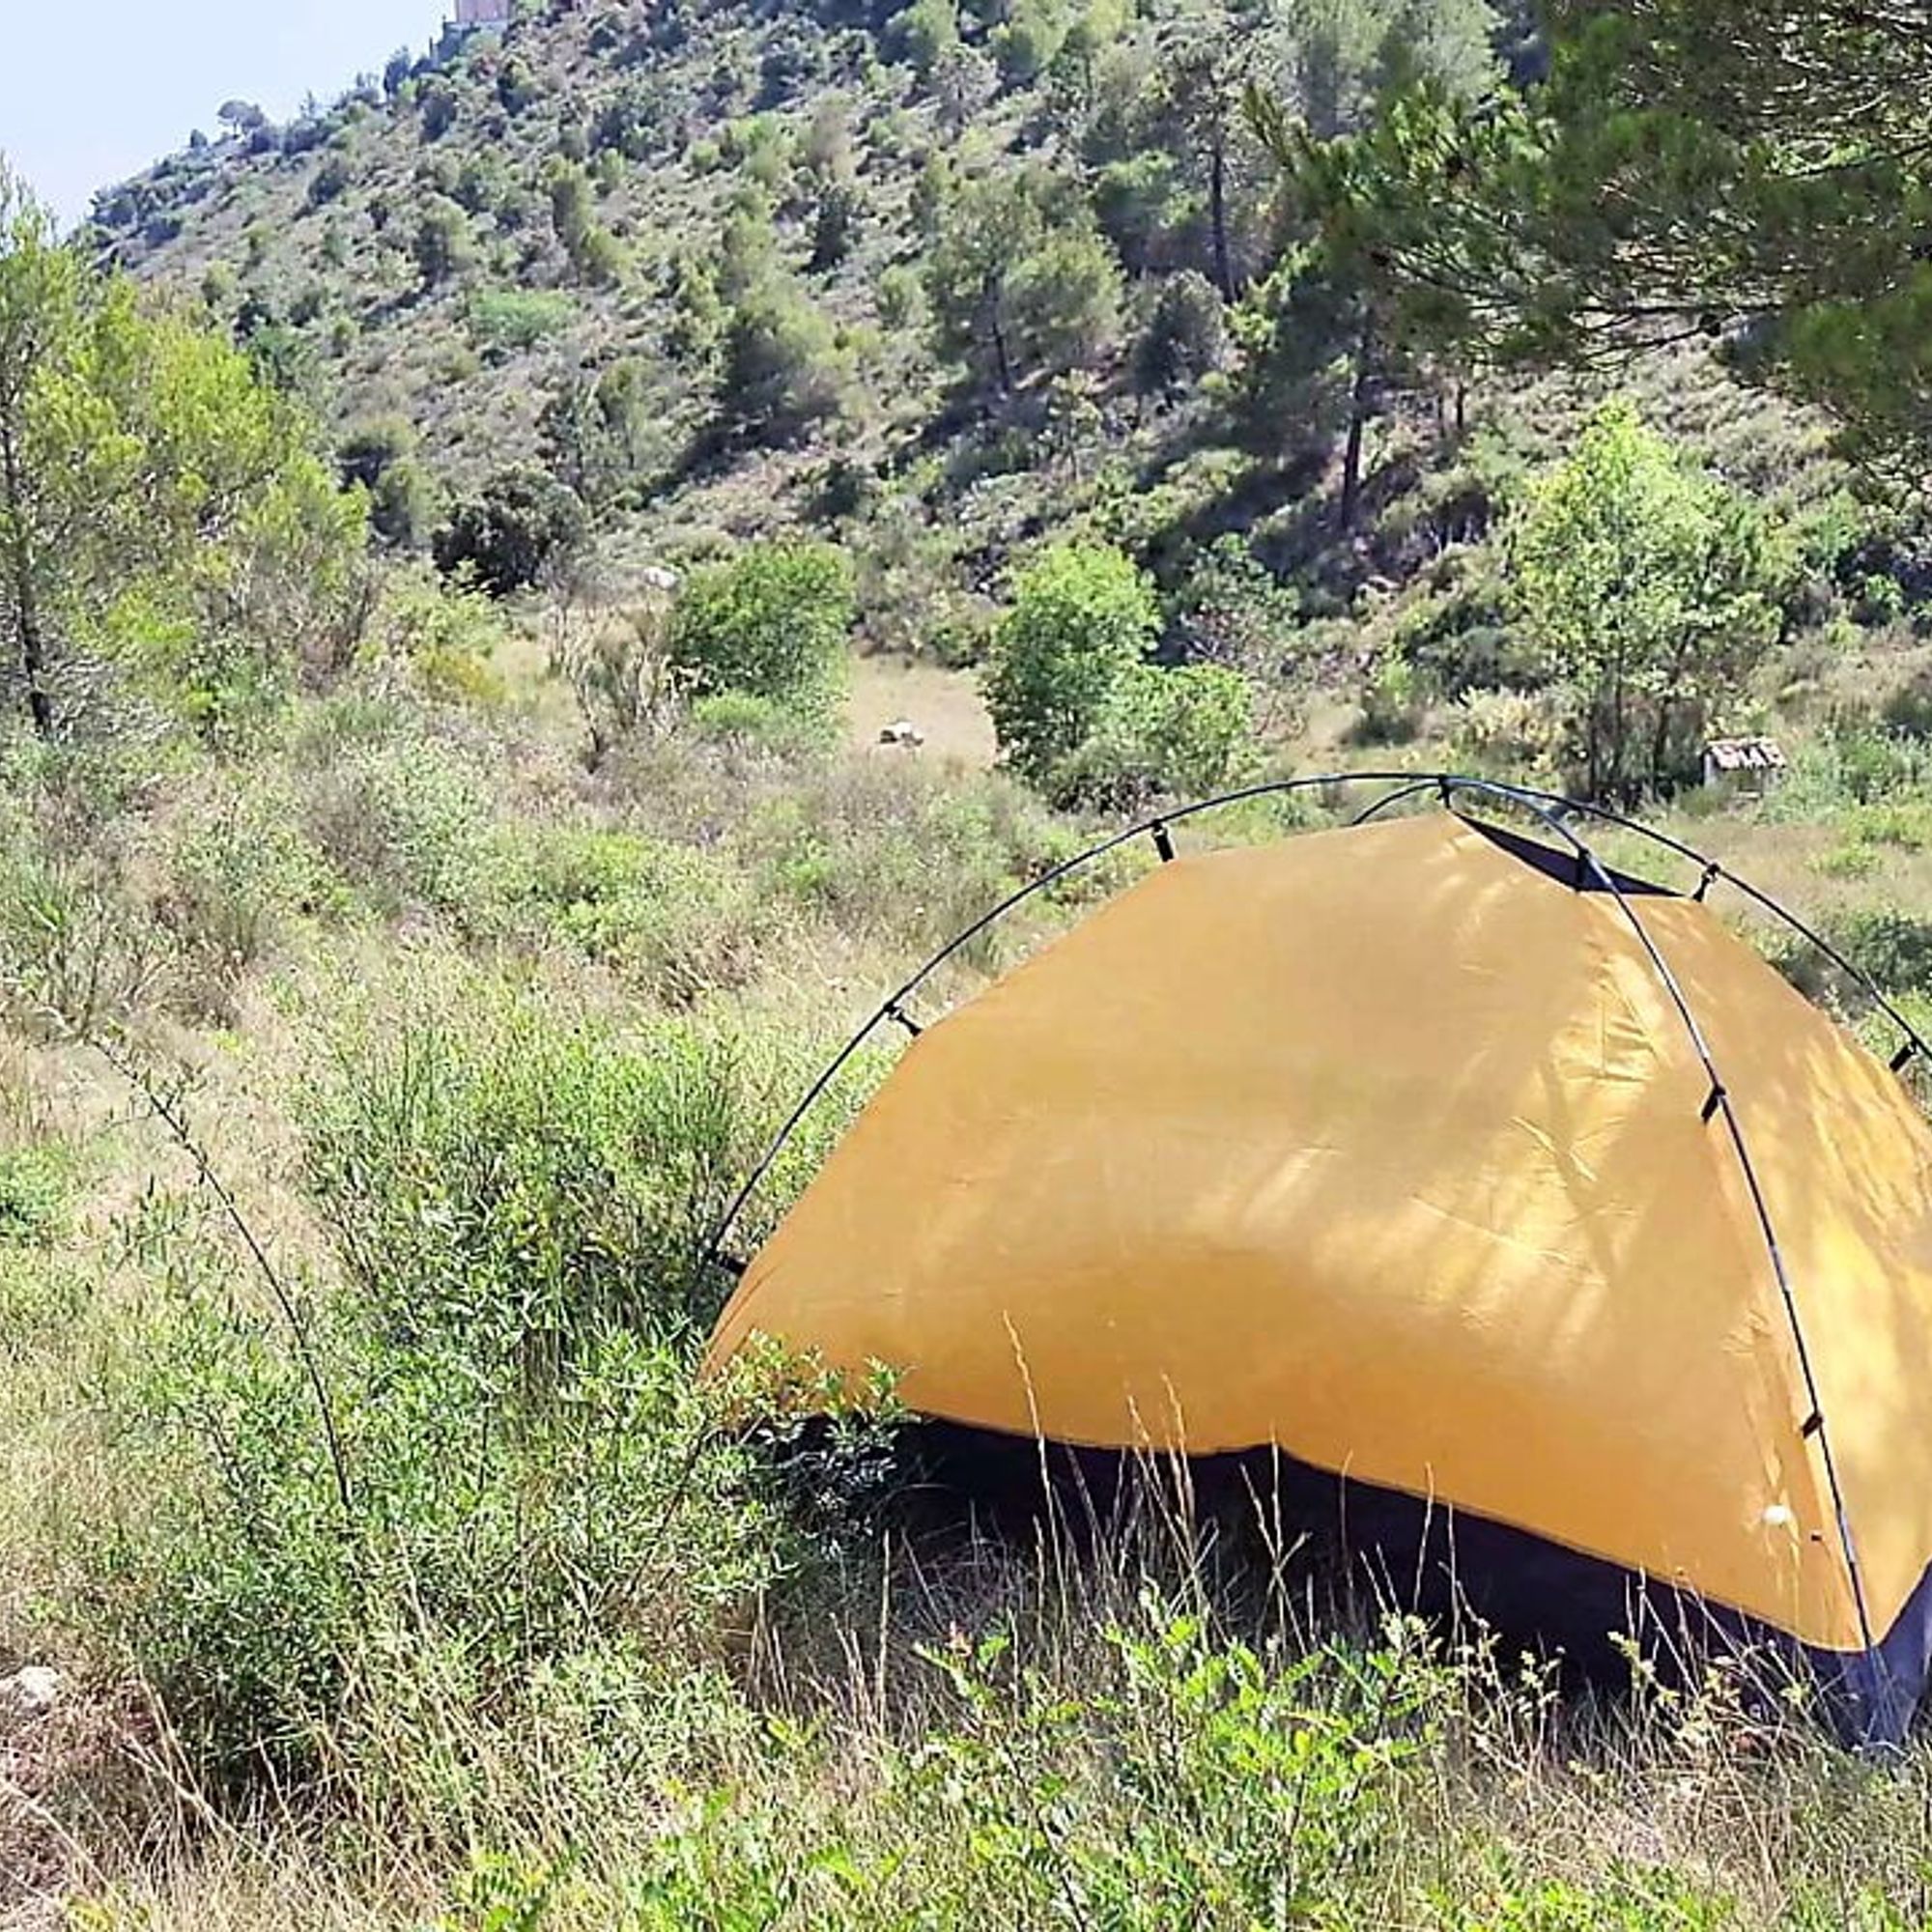 The tourist heard loud moaning and caught couple fucking in the tent. 